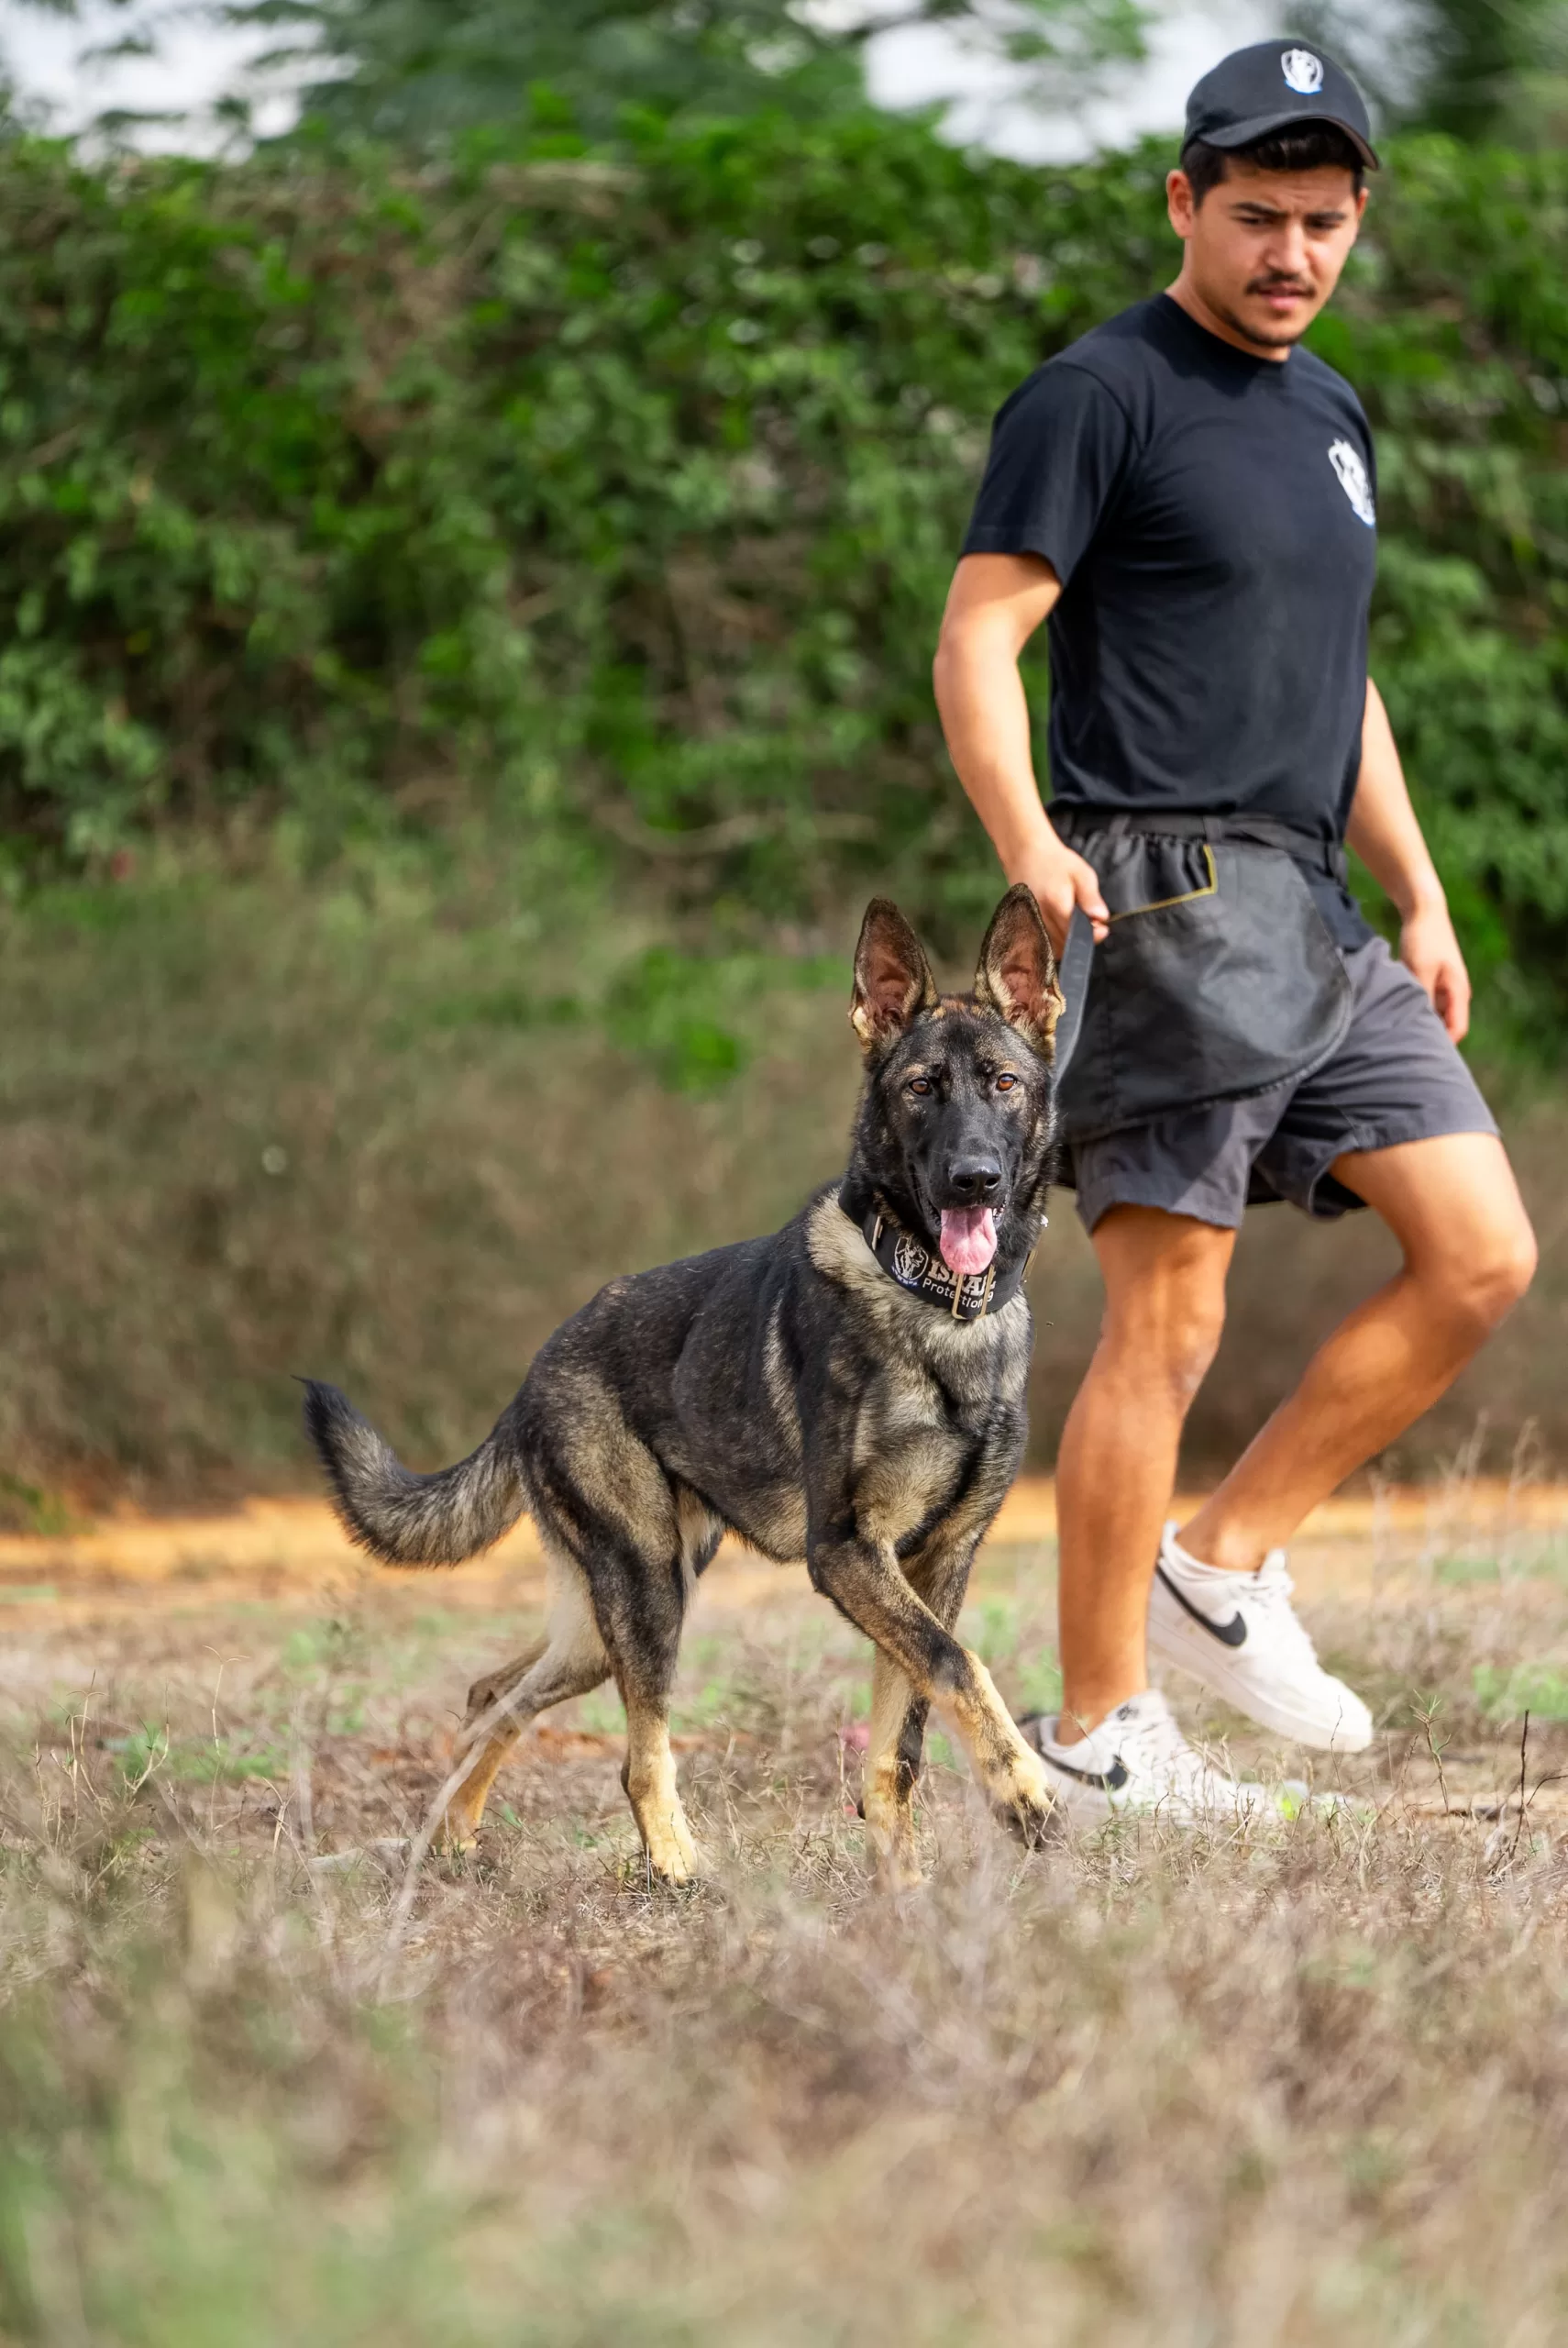 Israel Protection dog trainer with dog